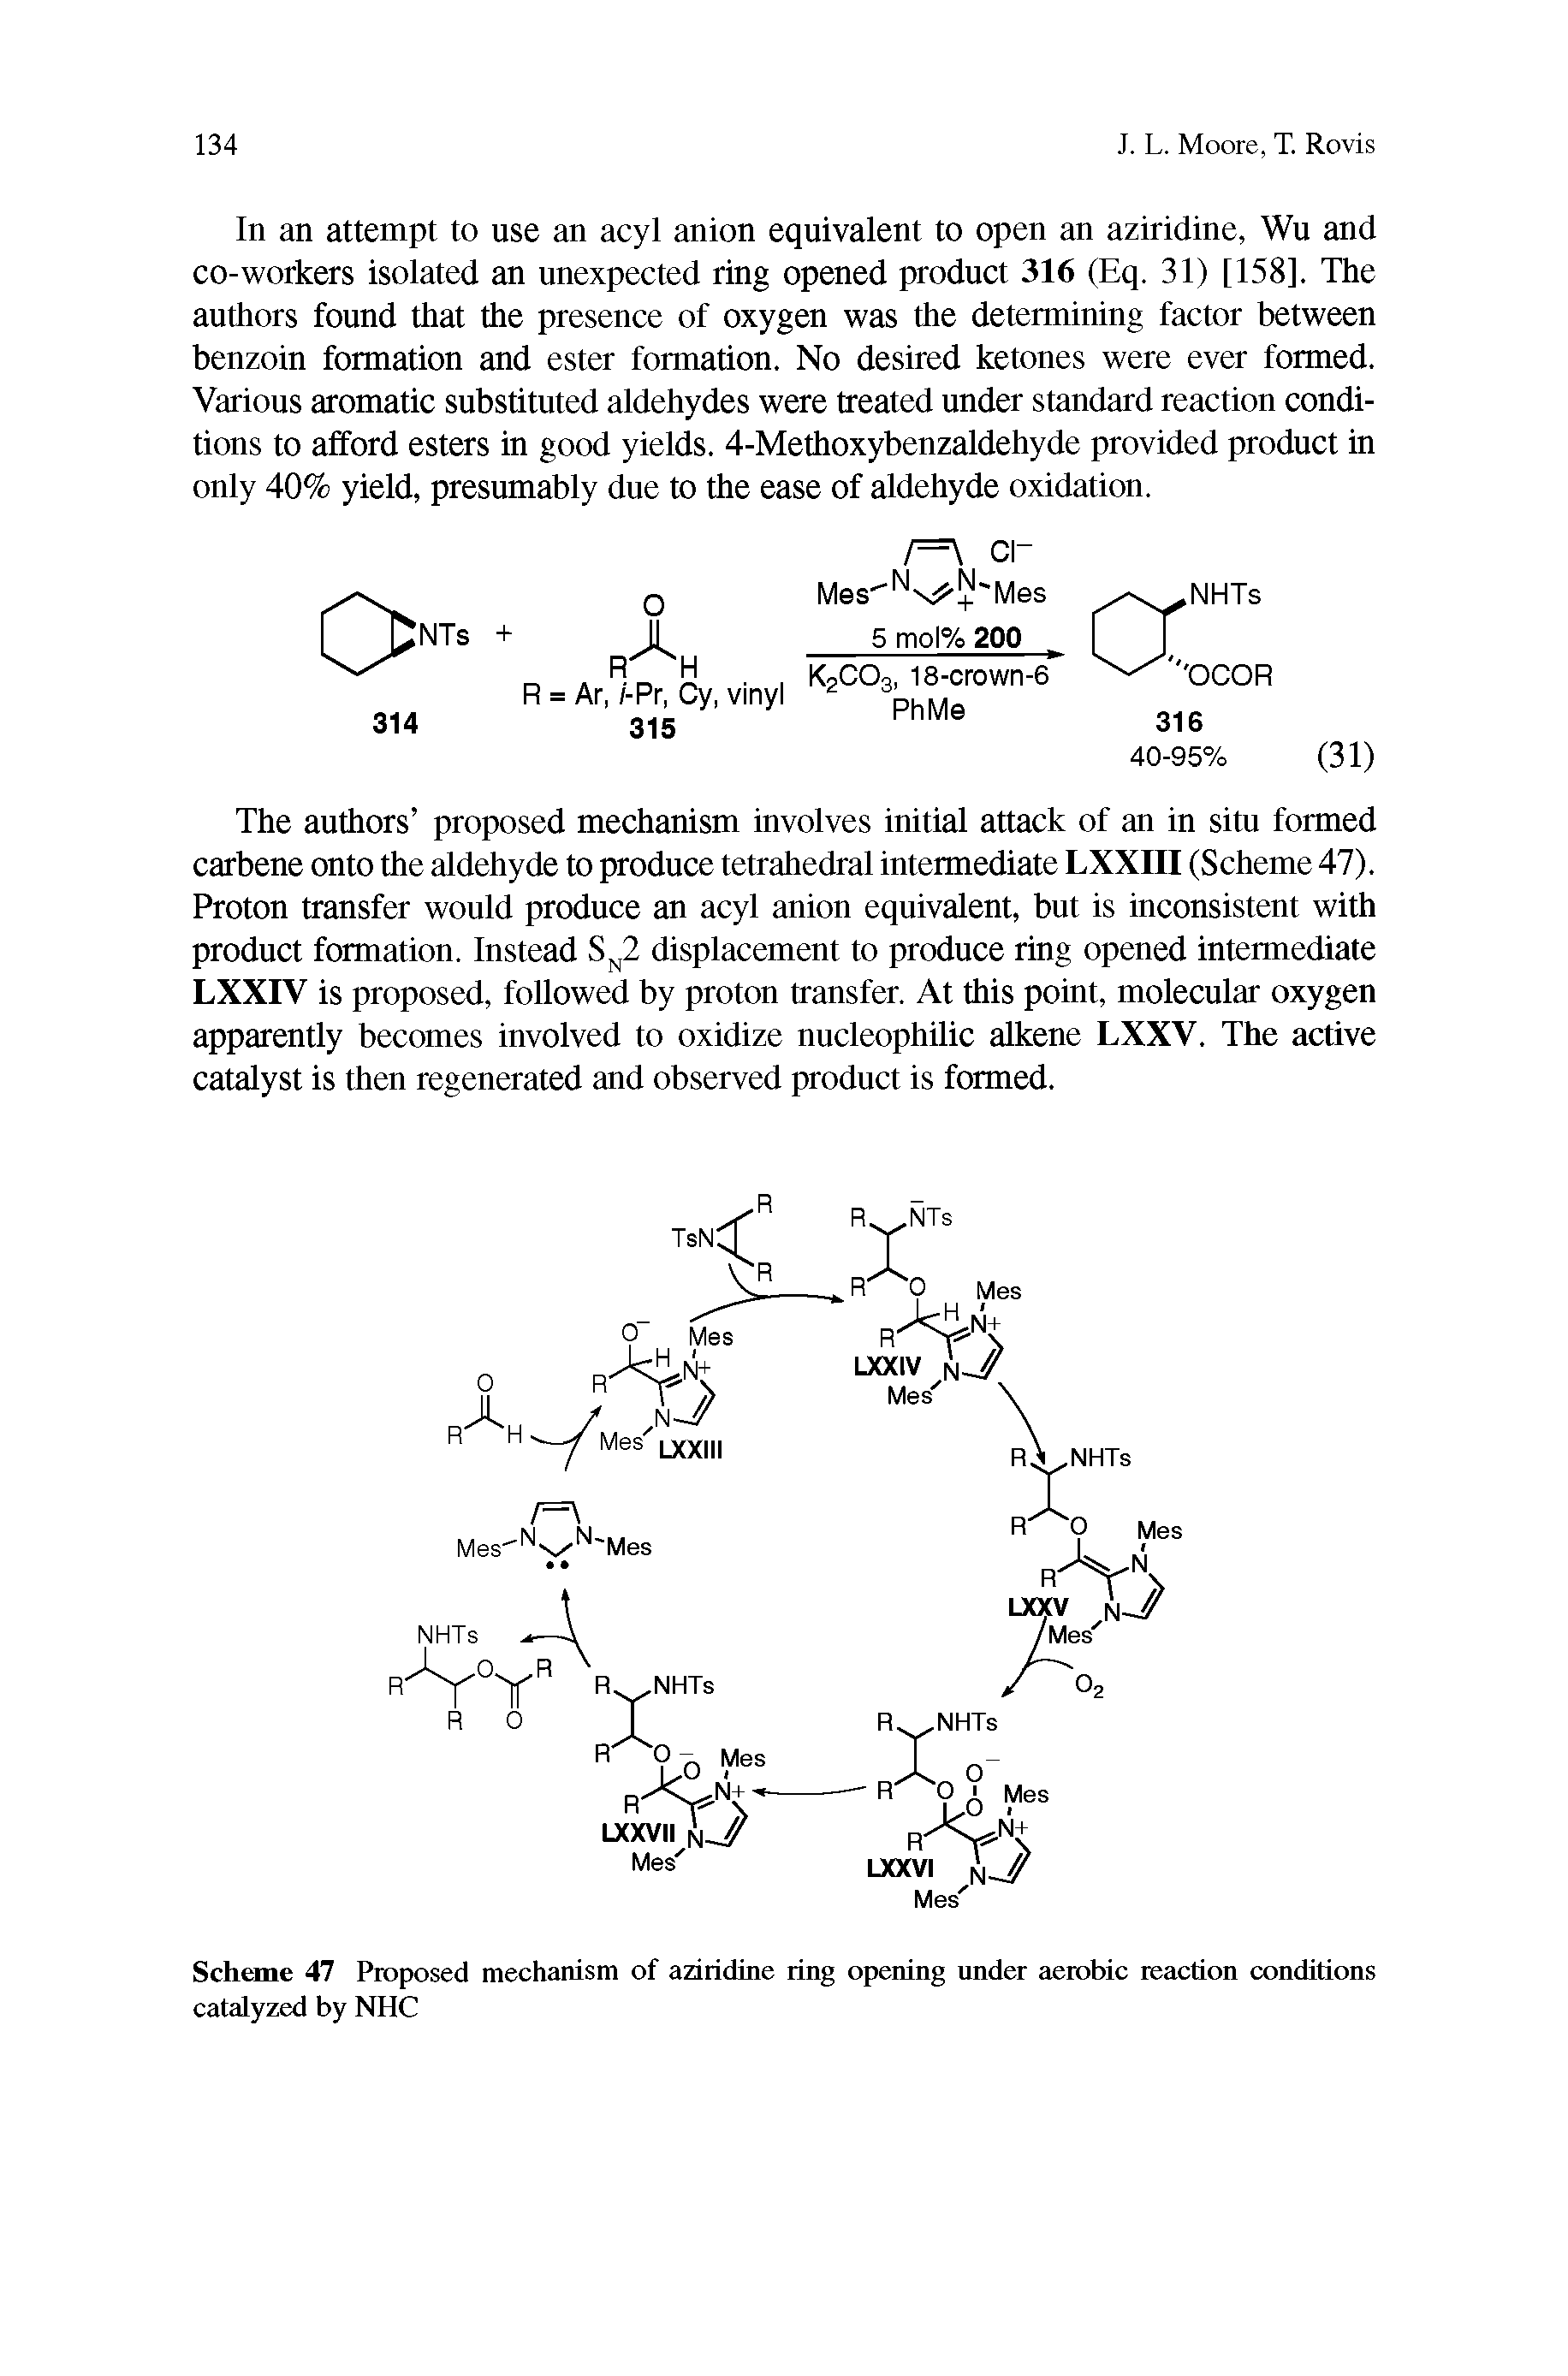 Scheme 47 Proposed mechanism of aziridine ring opening under aerobic reaction conditions catalyzed by NHC...